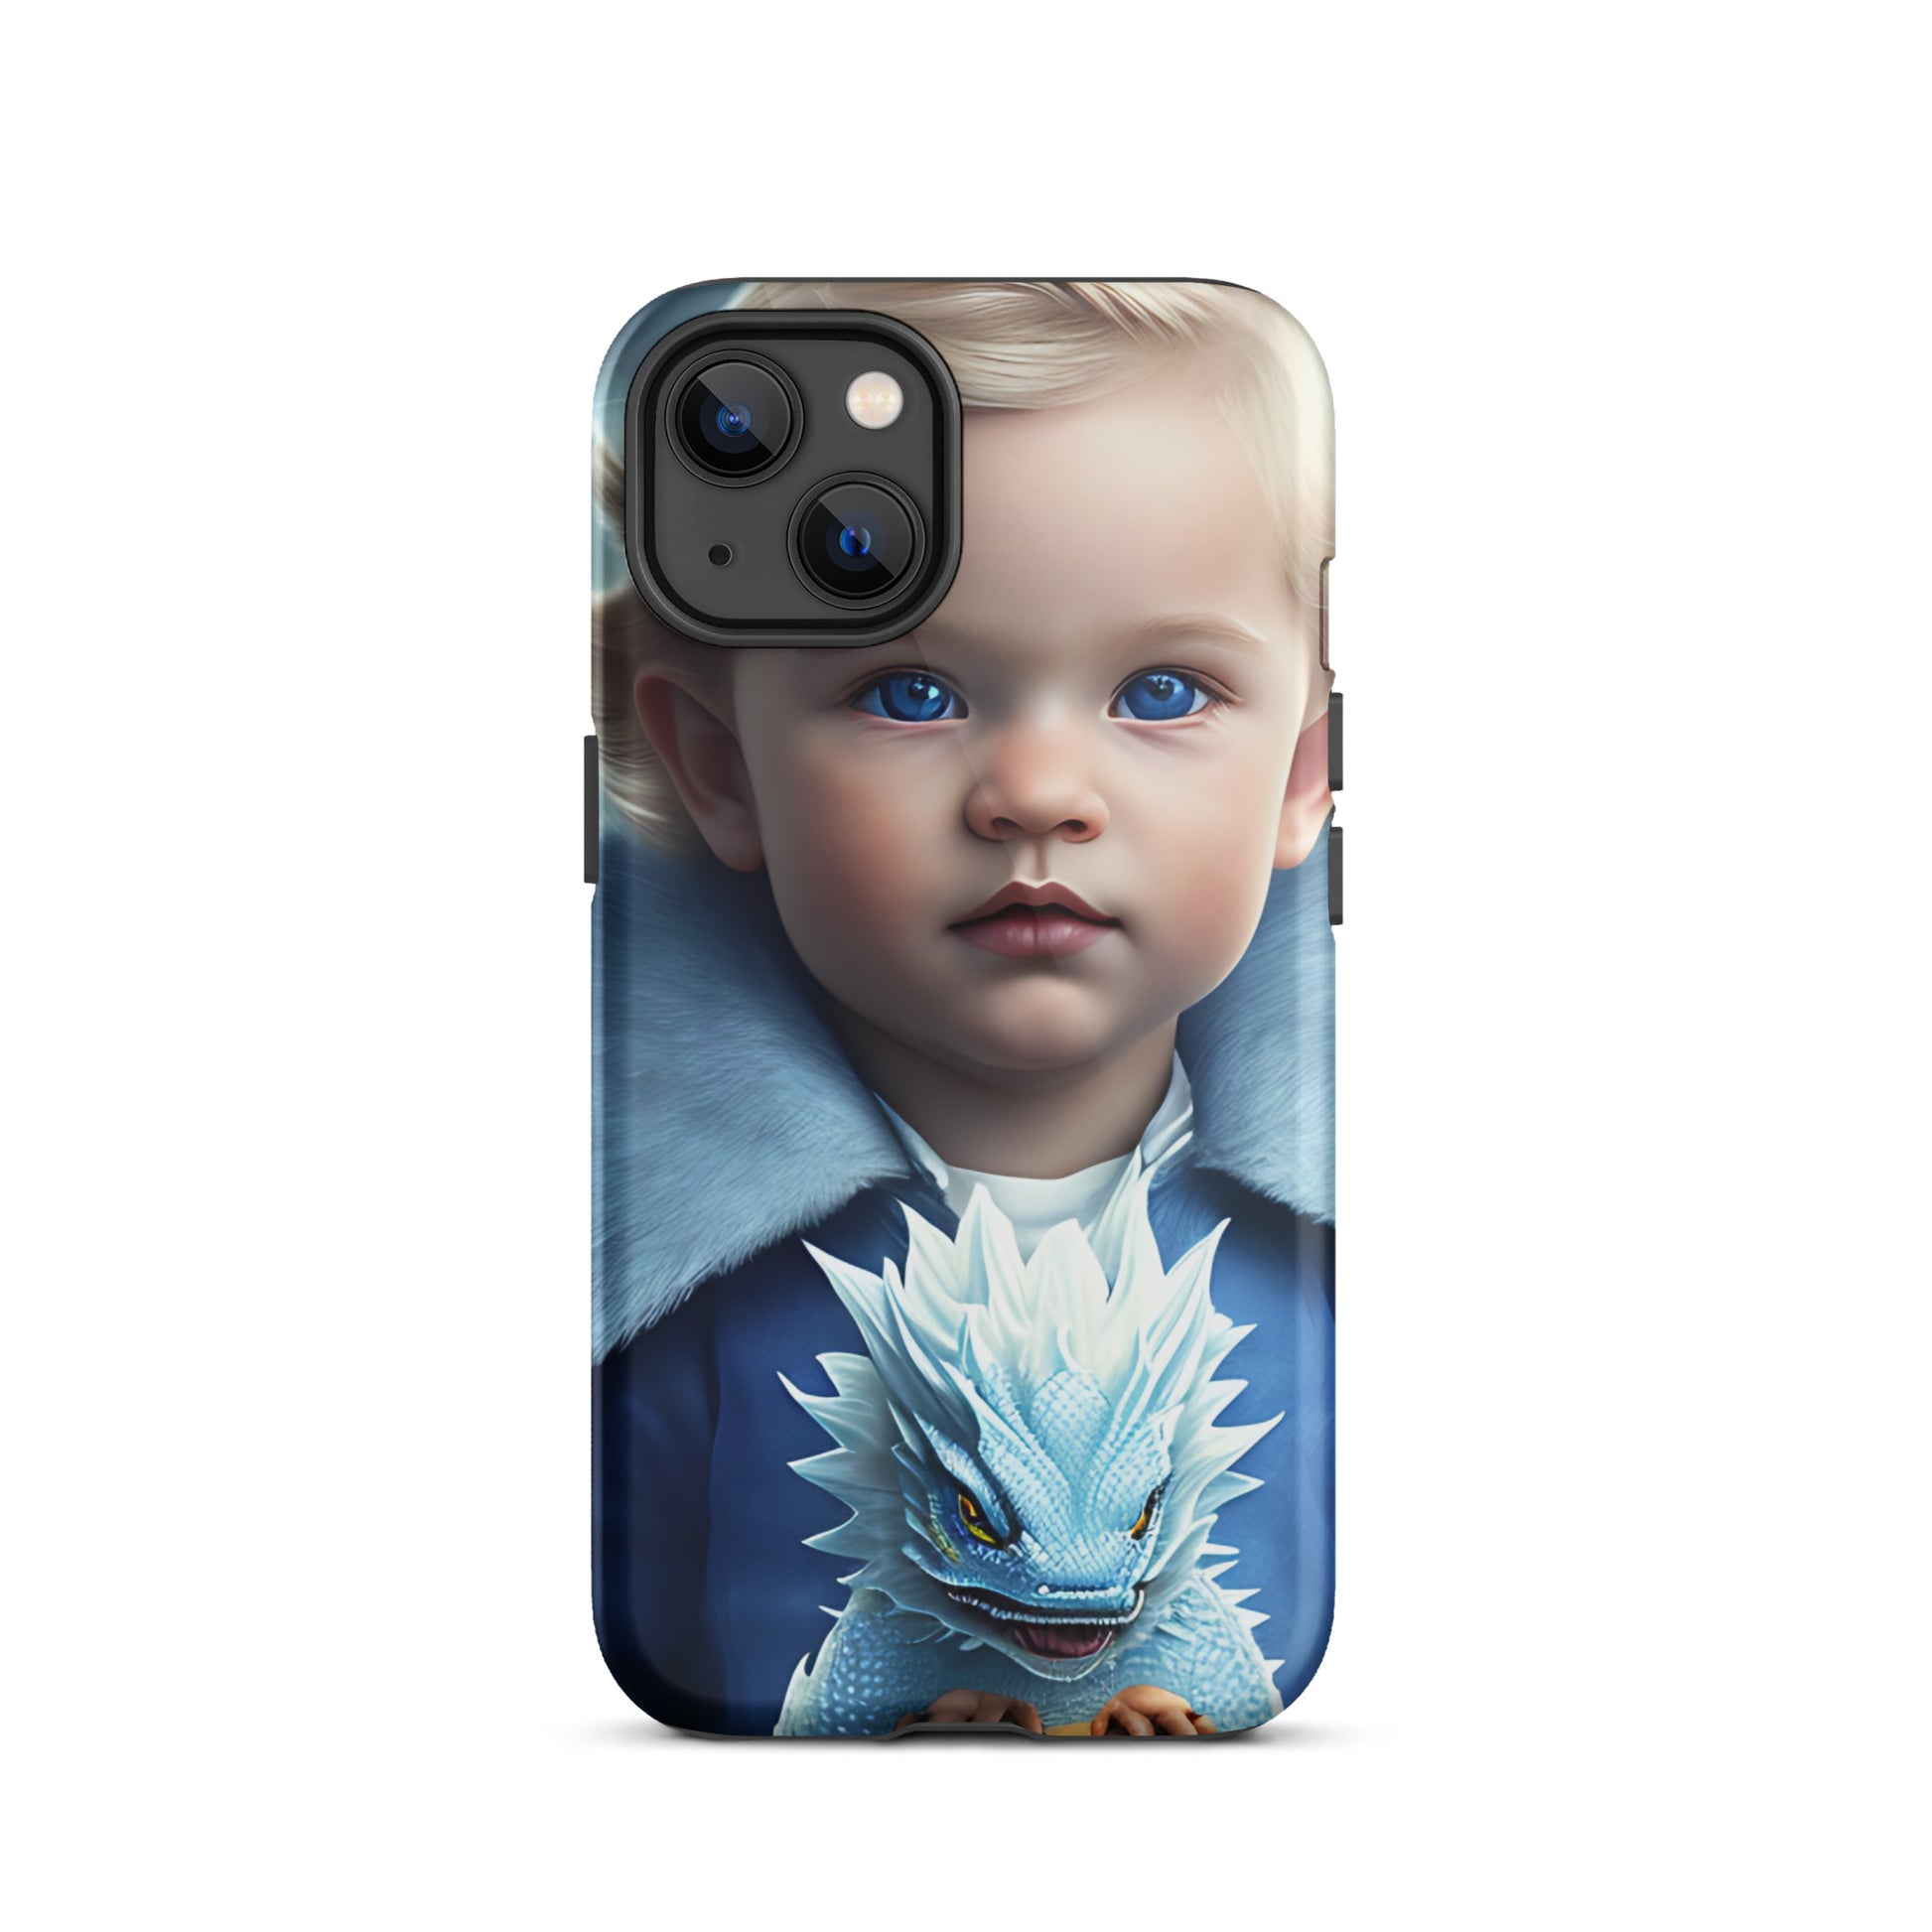 A picture of a an iphone case with a blond haired blue eyed boy, blue top holding a baby dragon in front - Dragon Prince tough iphone case - glossy-iphone-13-frontA picture of a an iphone case with a blond haired blue eyed boy, blue top holding a baby ice dragon in front - Dragon Prince #2 tough iphone case - glossy-iphone-13-front